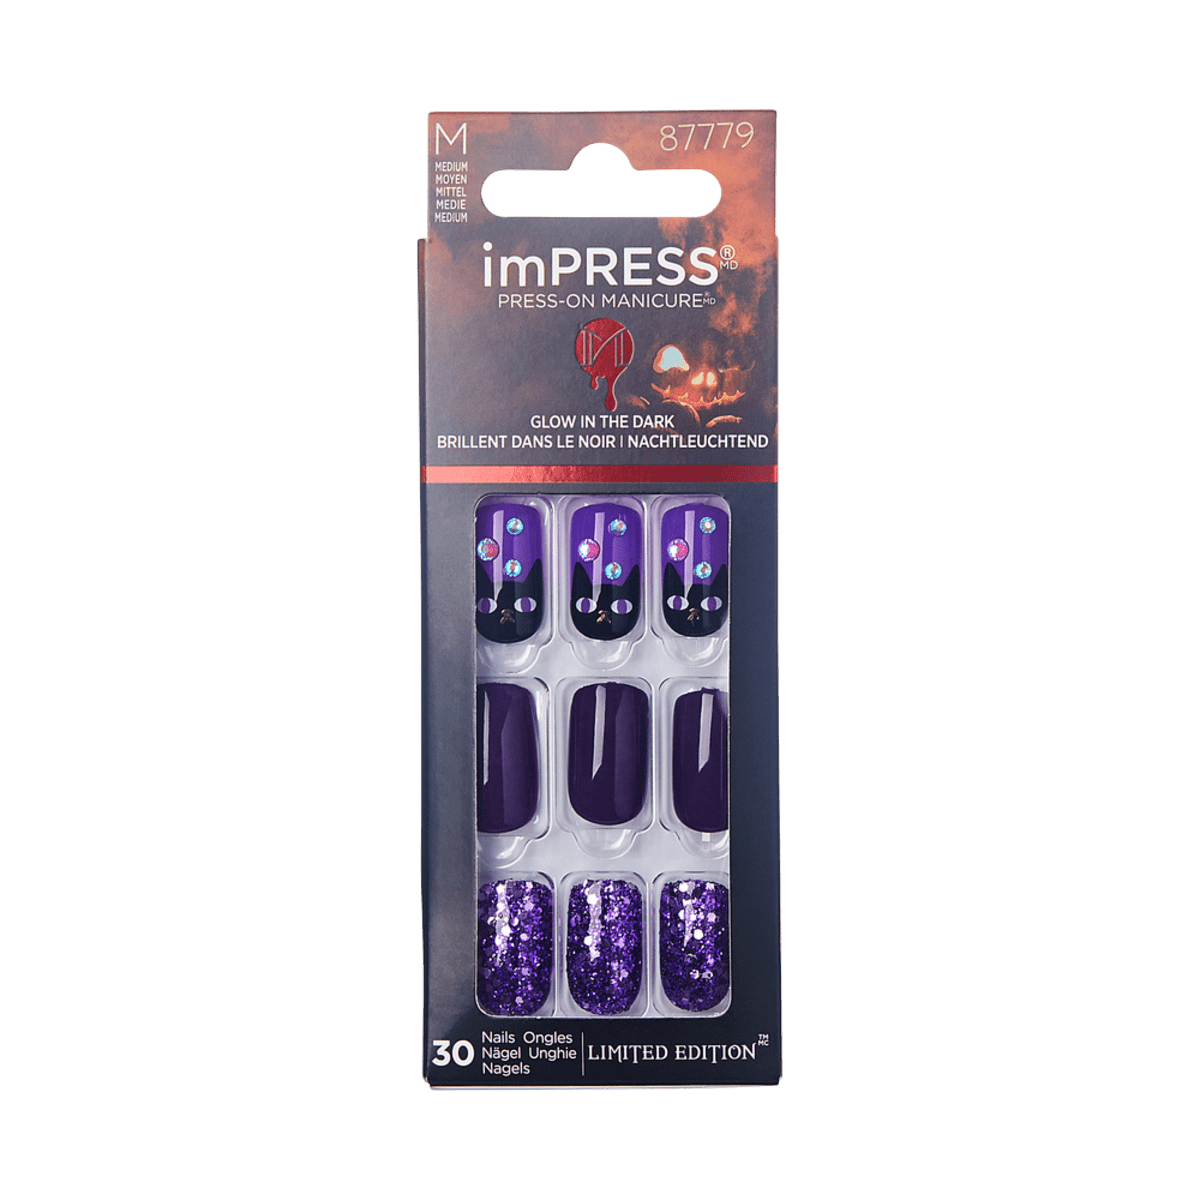 KISS imPRESS No Glue Mani Press On Nails, Design, Too cute to spook, Purple, Med Squoval, 30ct